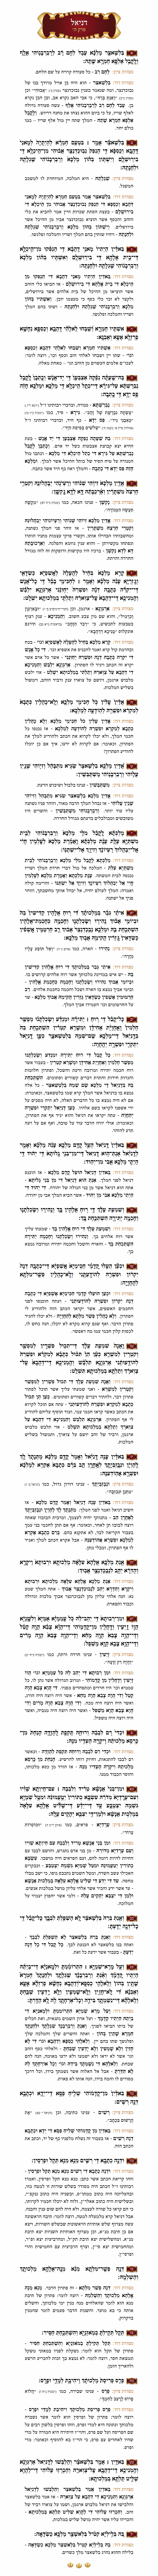 Sefer Daniel Chapter 5 with commentary